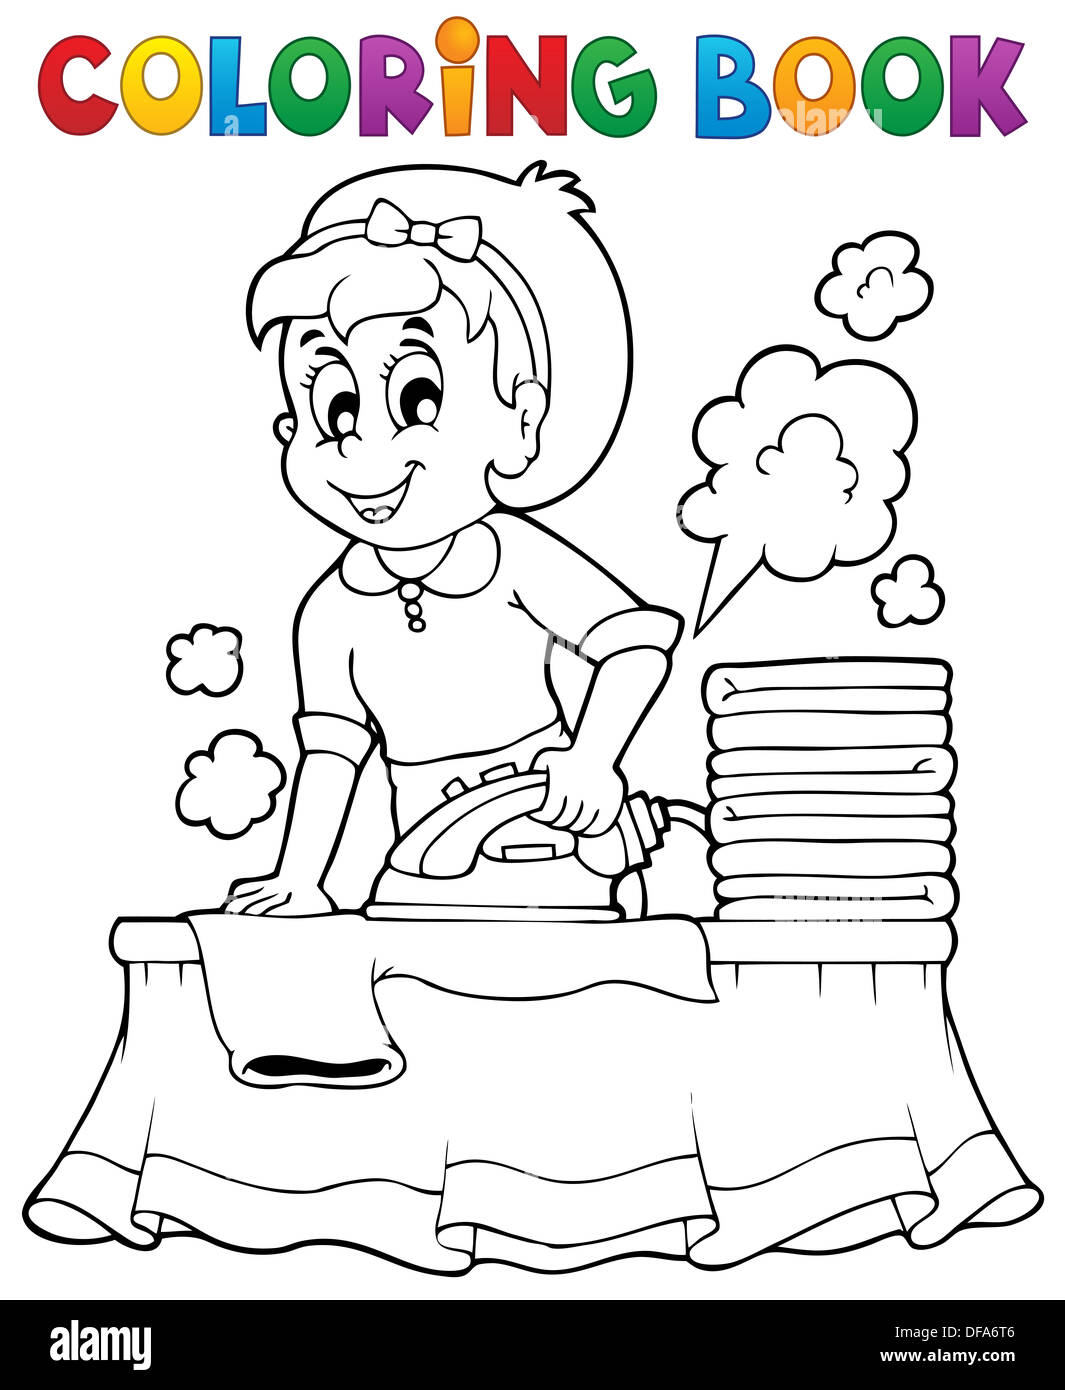 Coloring book with housewife 1 - picture illustration. Stock Photo